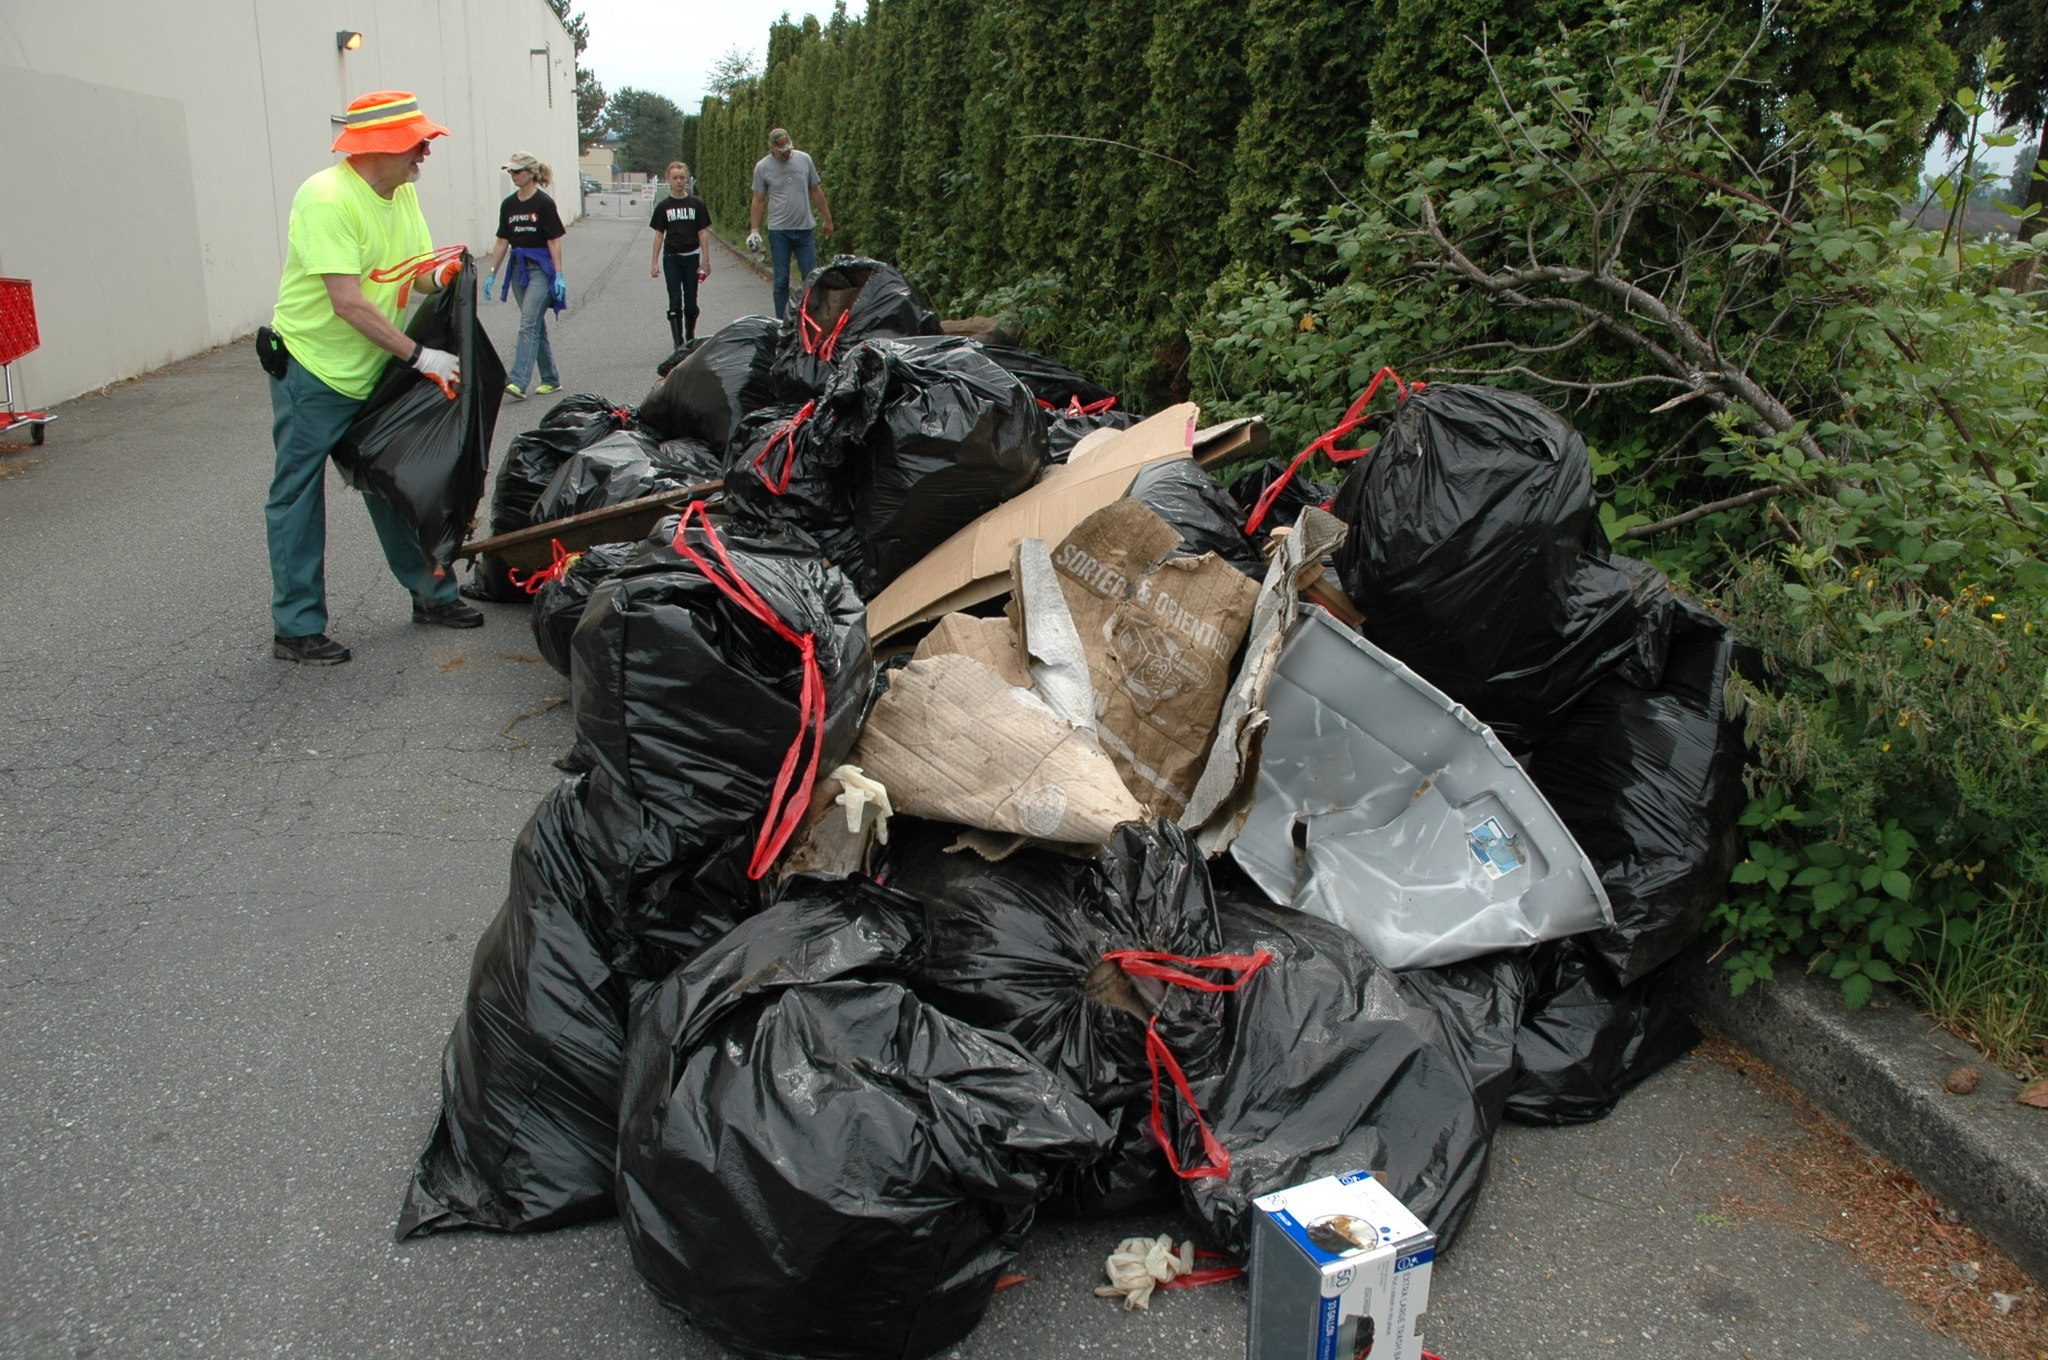 Michael Lloyd throws another trash bag on the pile during the May 14 cleanup at the Smokey Point Safeway.